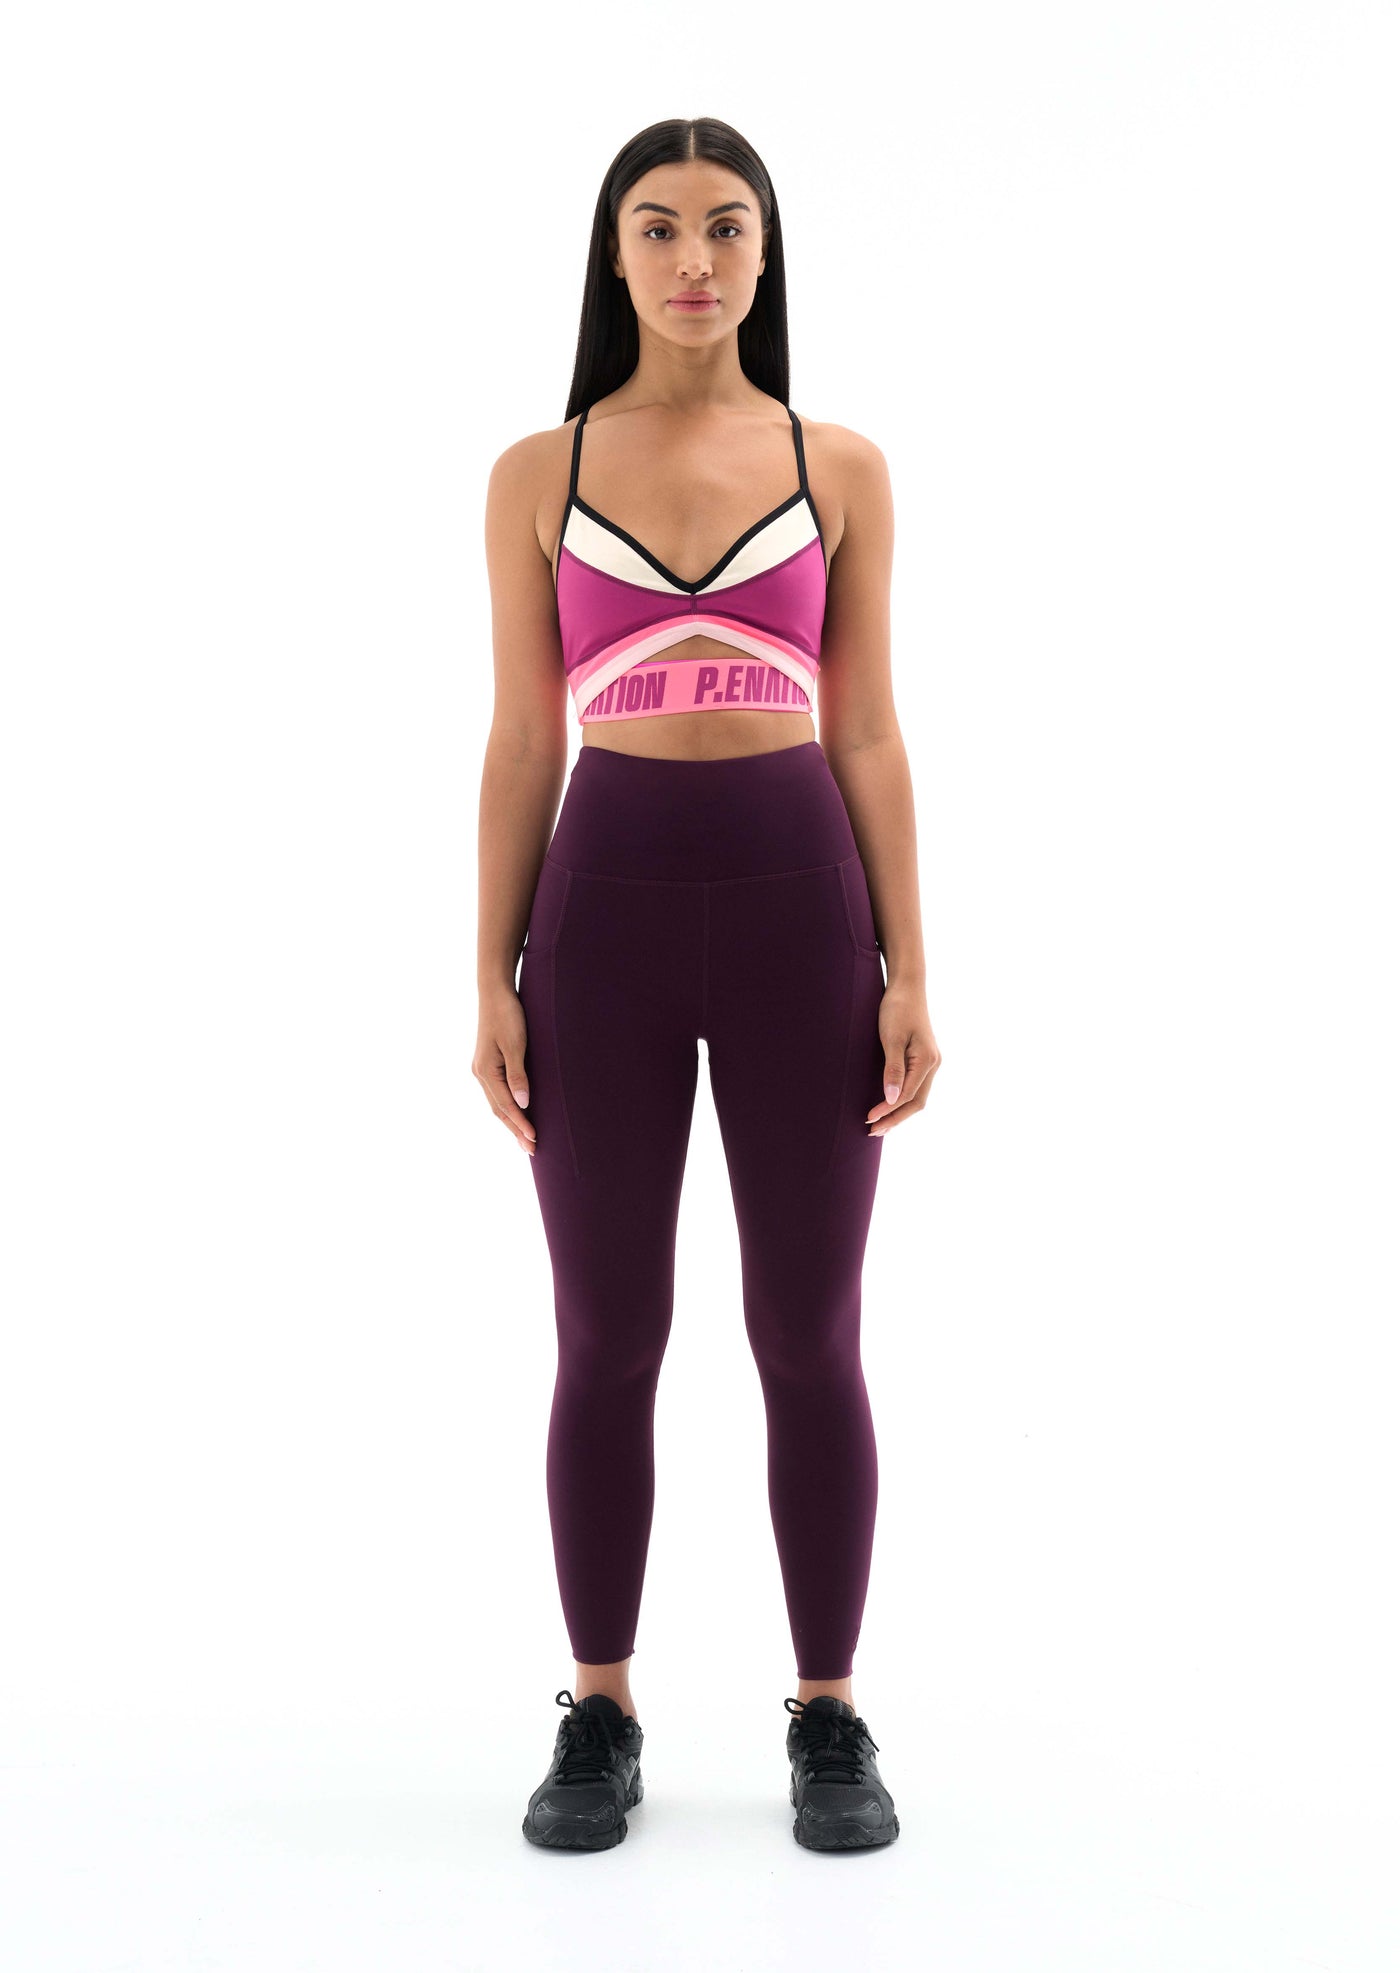 P.E. NATION AMPLIFY LEGGING IN POTENT PURPLE – FOUR AND NINE